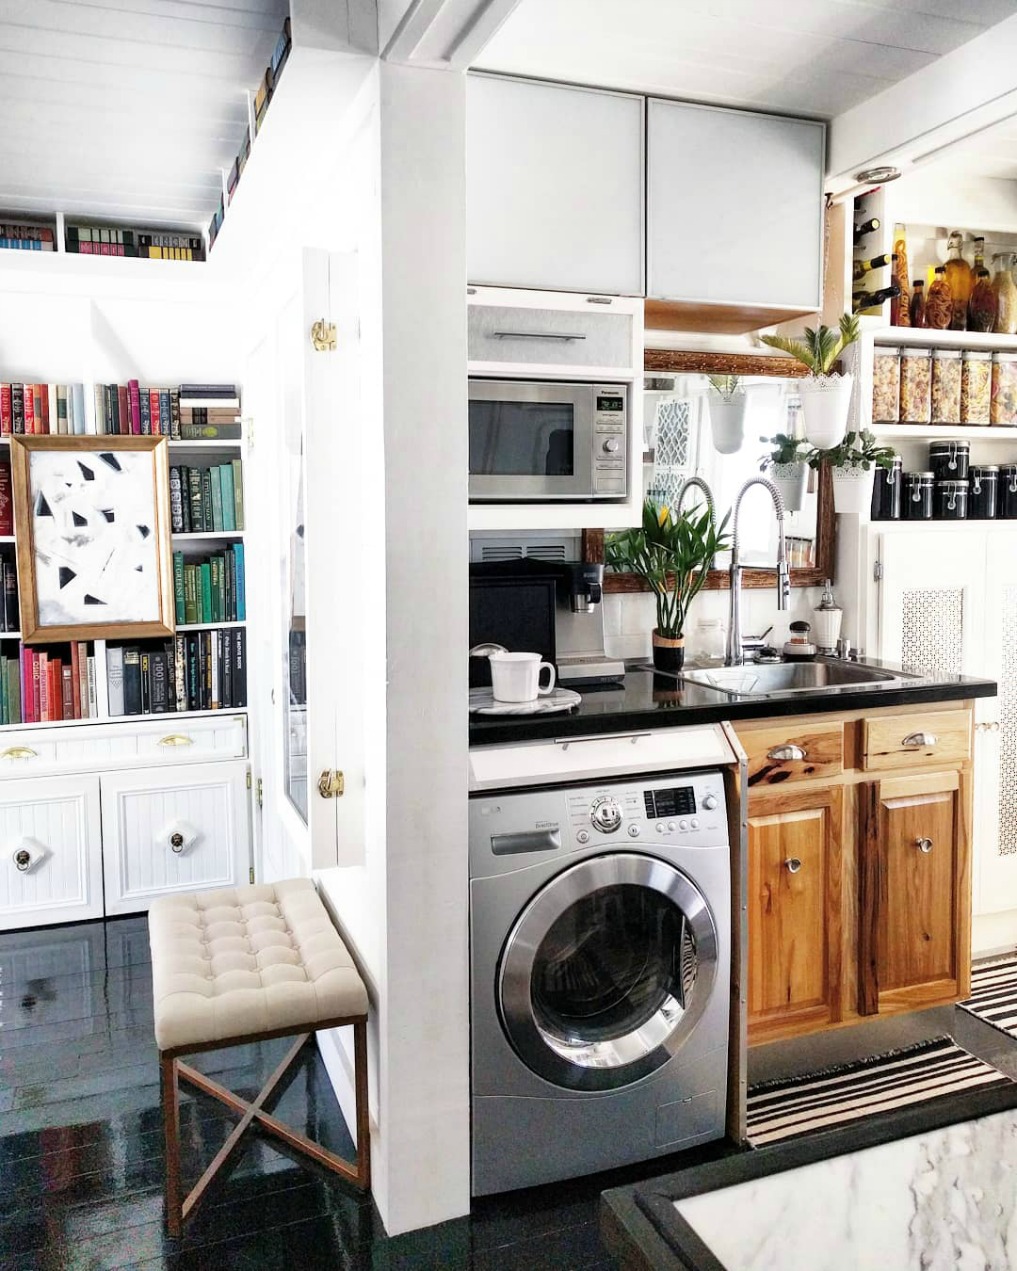 Eclectic Home Tour - Insieme House - tour this tiny house with a kitchen/laundry combo 